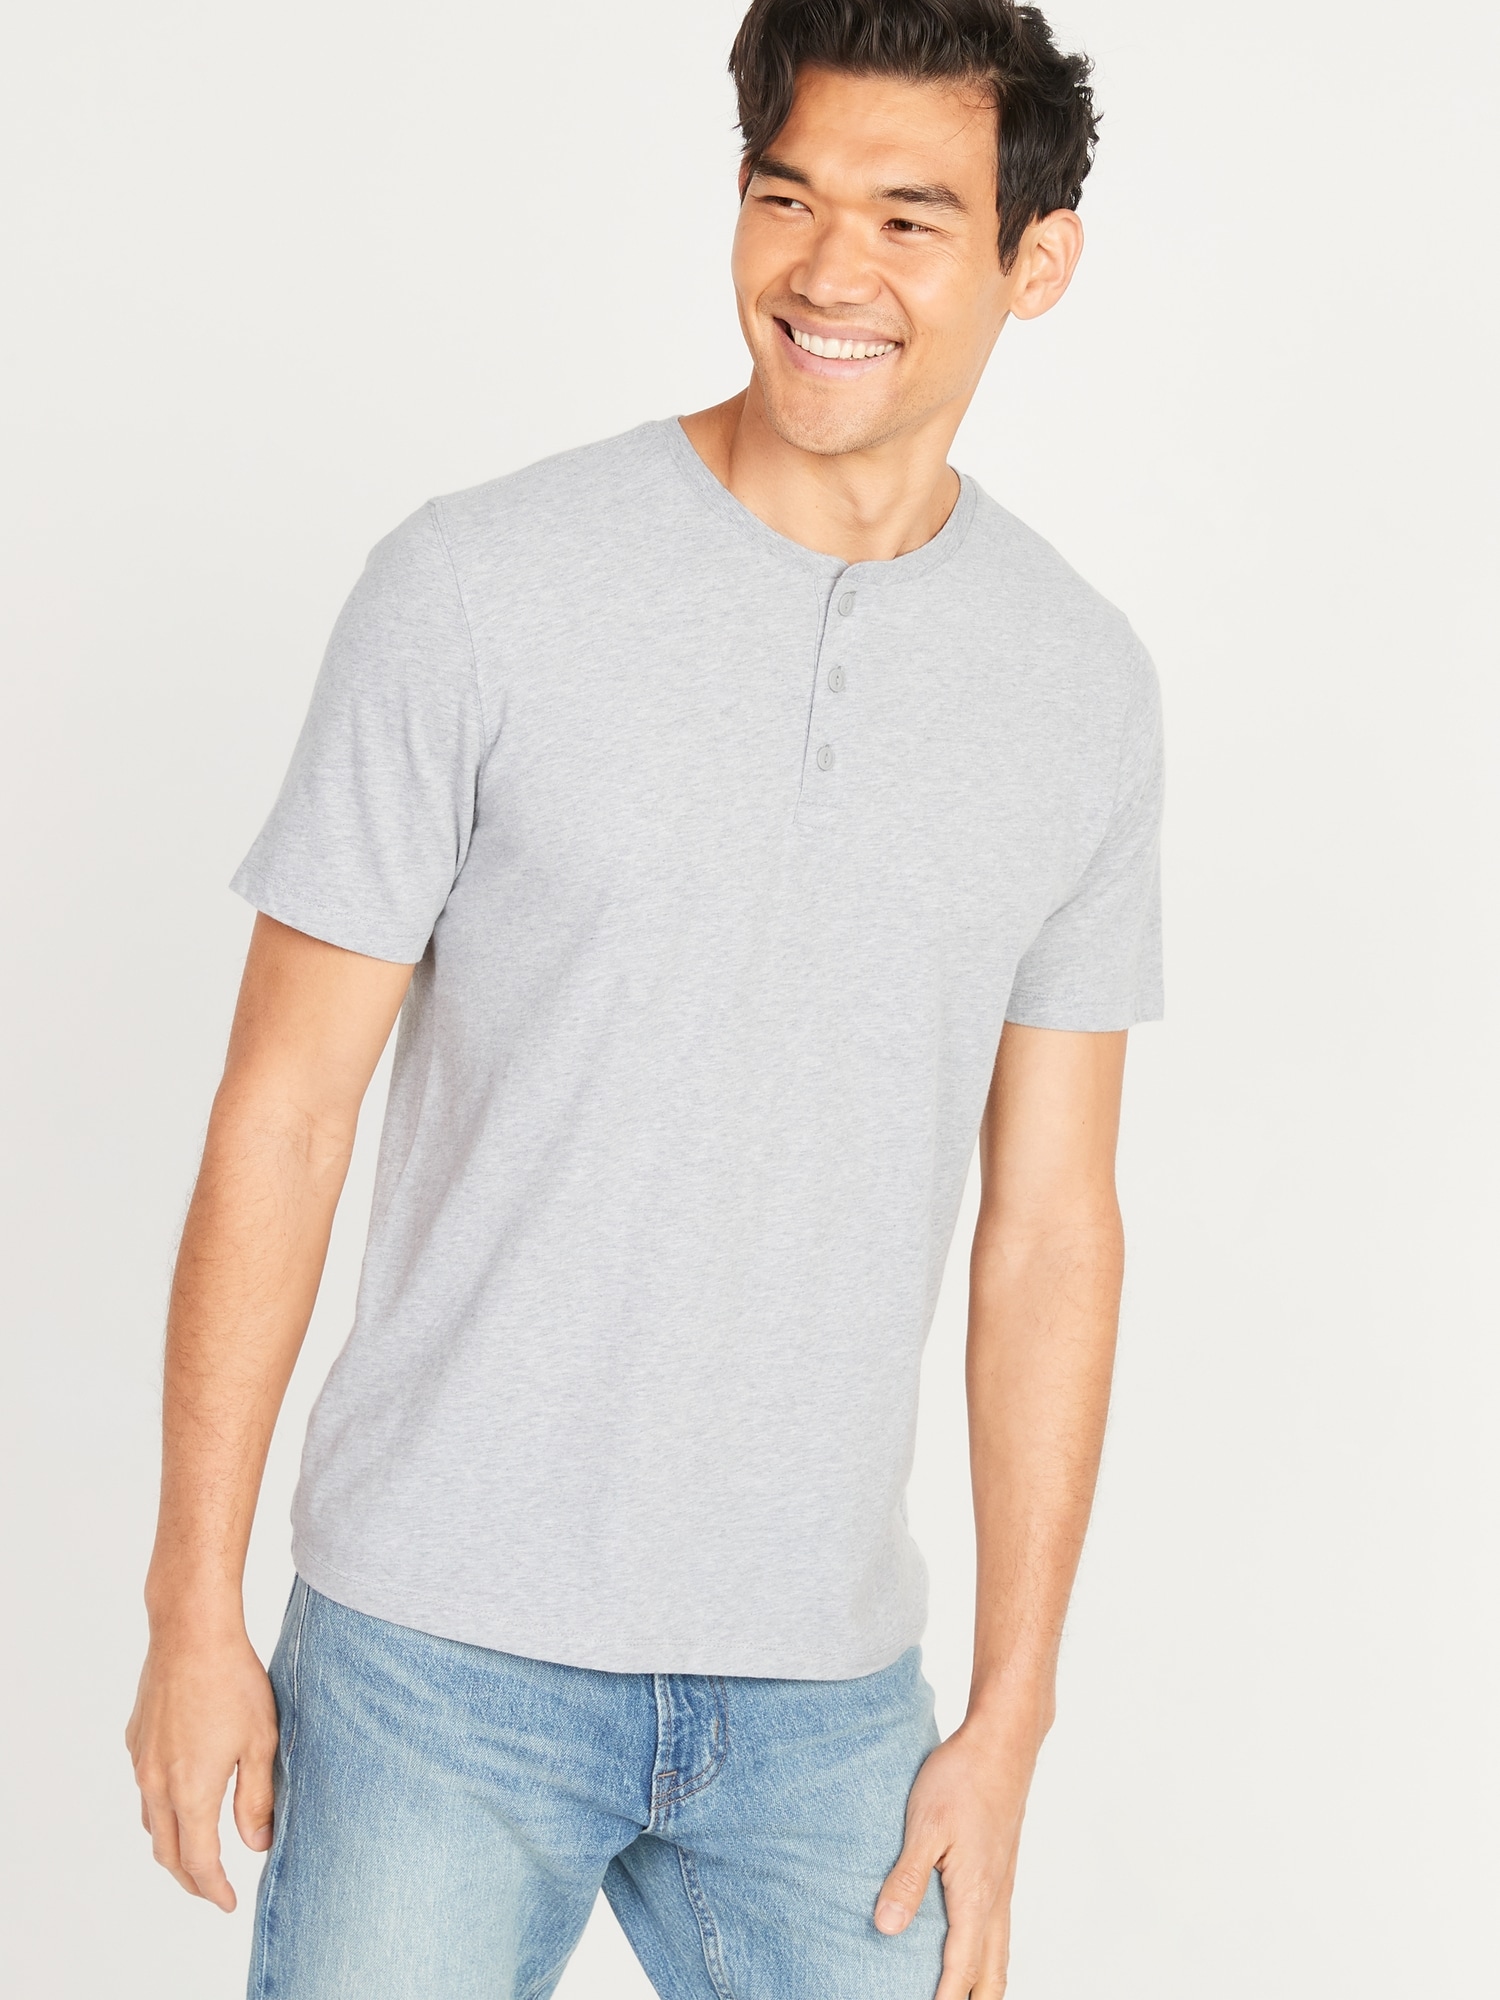 Old Navy Men's Soft-Washed Short-Sleeve Henley T-Shirt - - Tall Size M